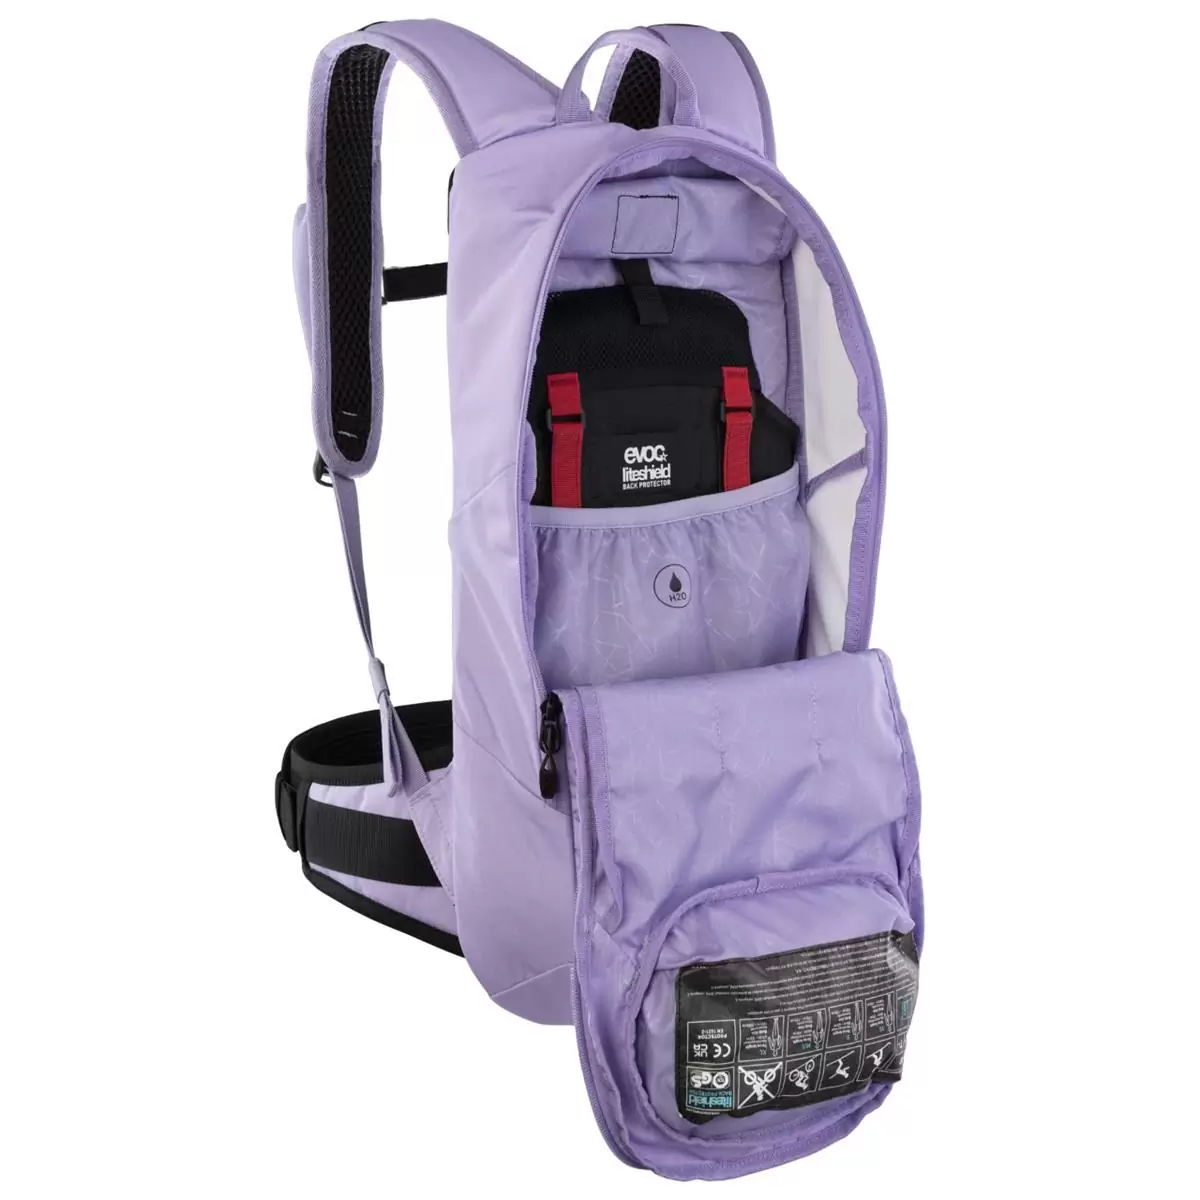 FR LITE RACE 10 Backpack With Back Protector 10L Purple Size S #4